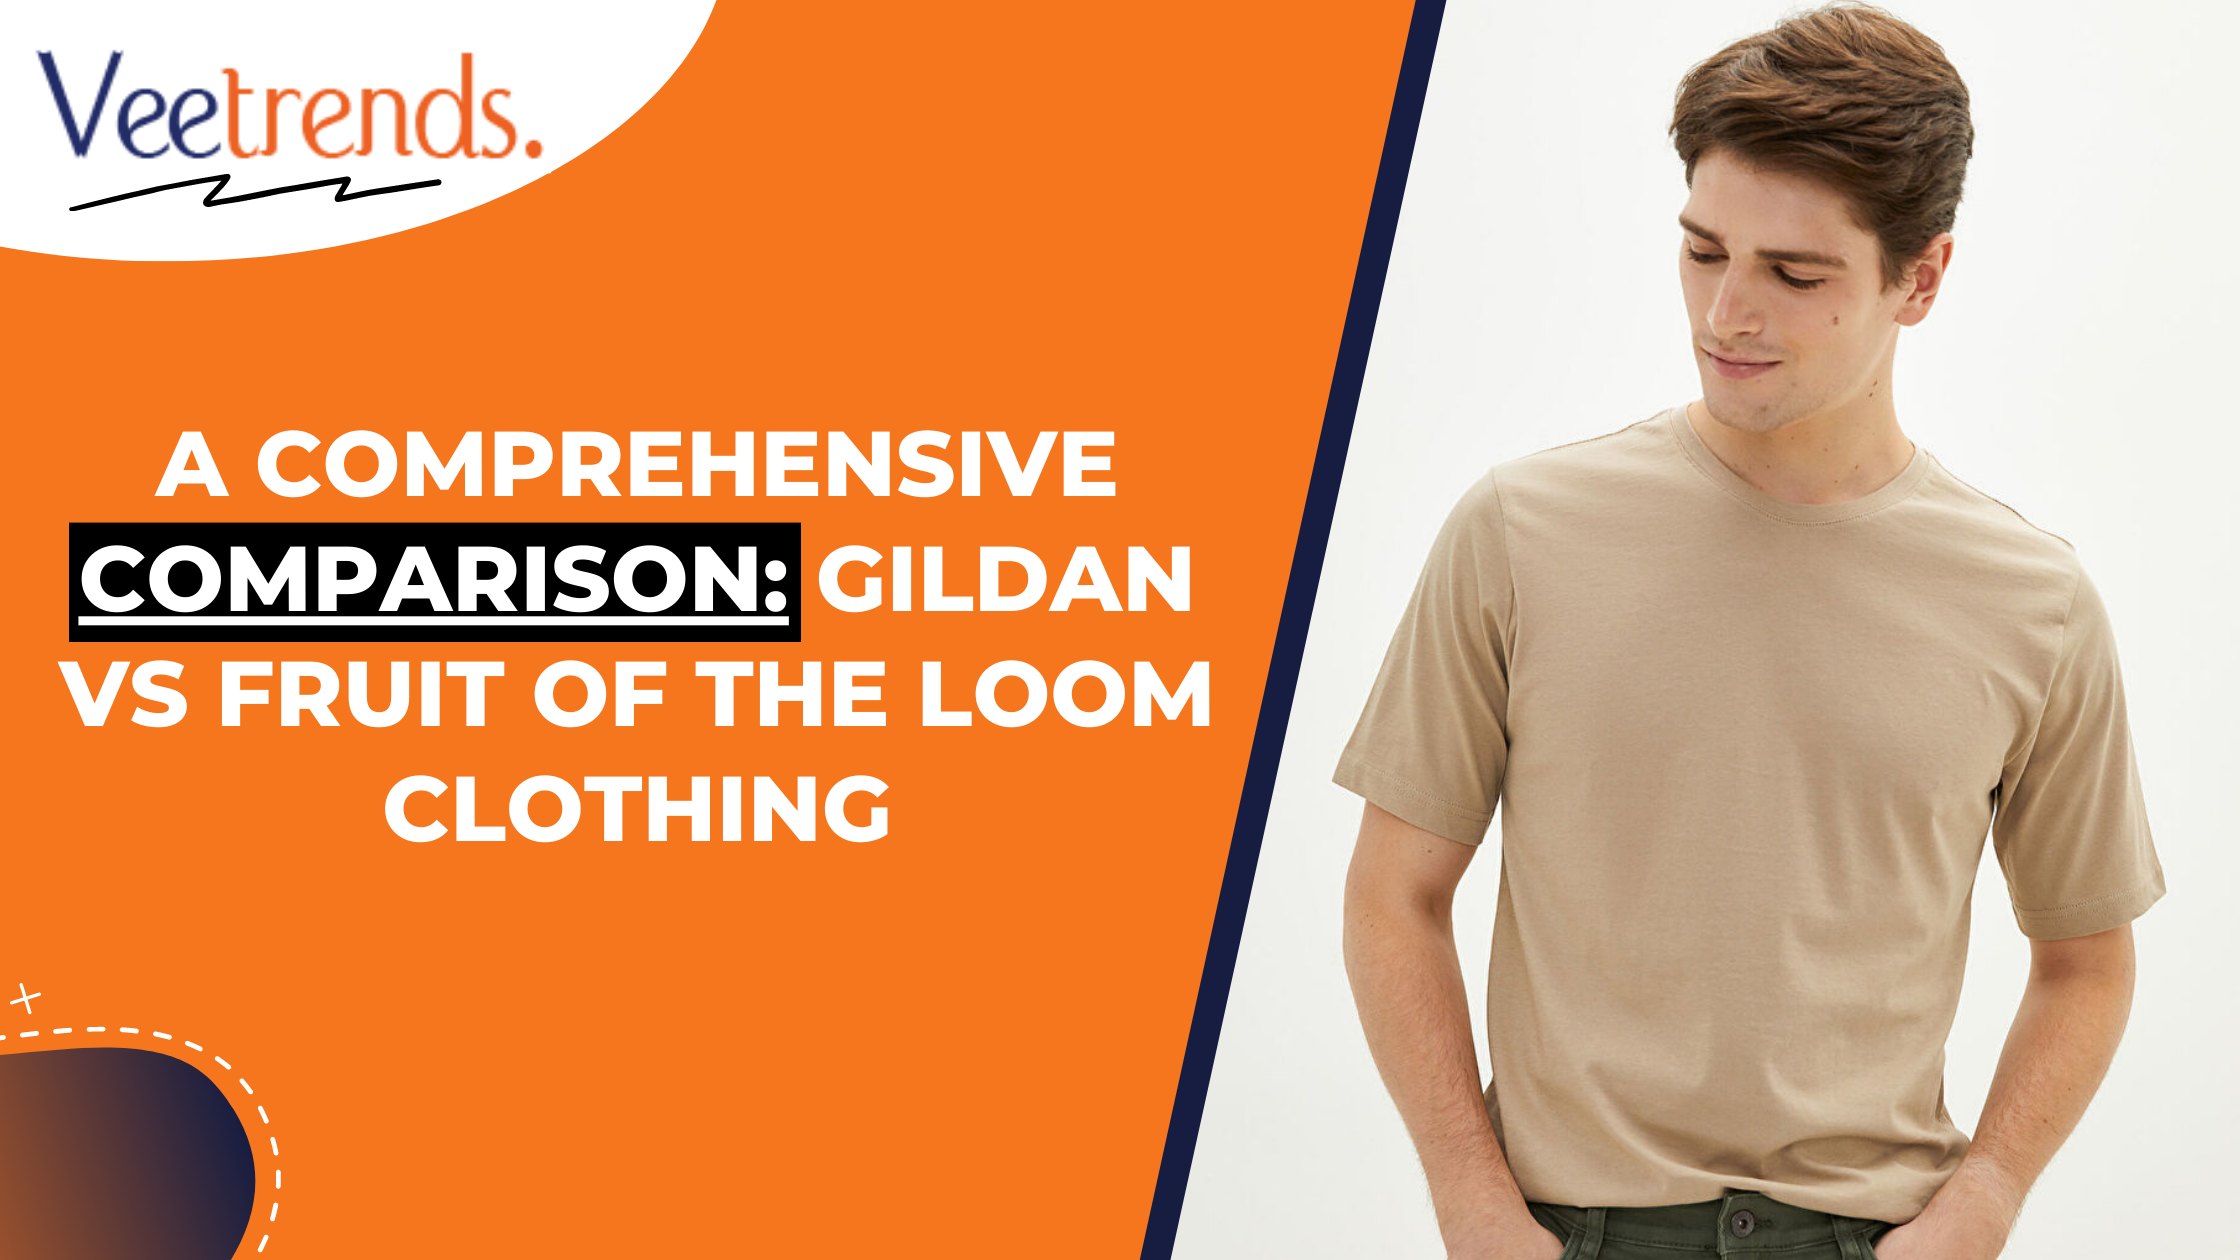 Shirts are all either fruit of the loom or gildan depending on